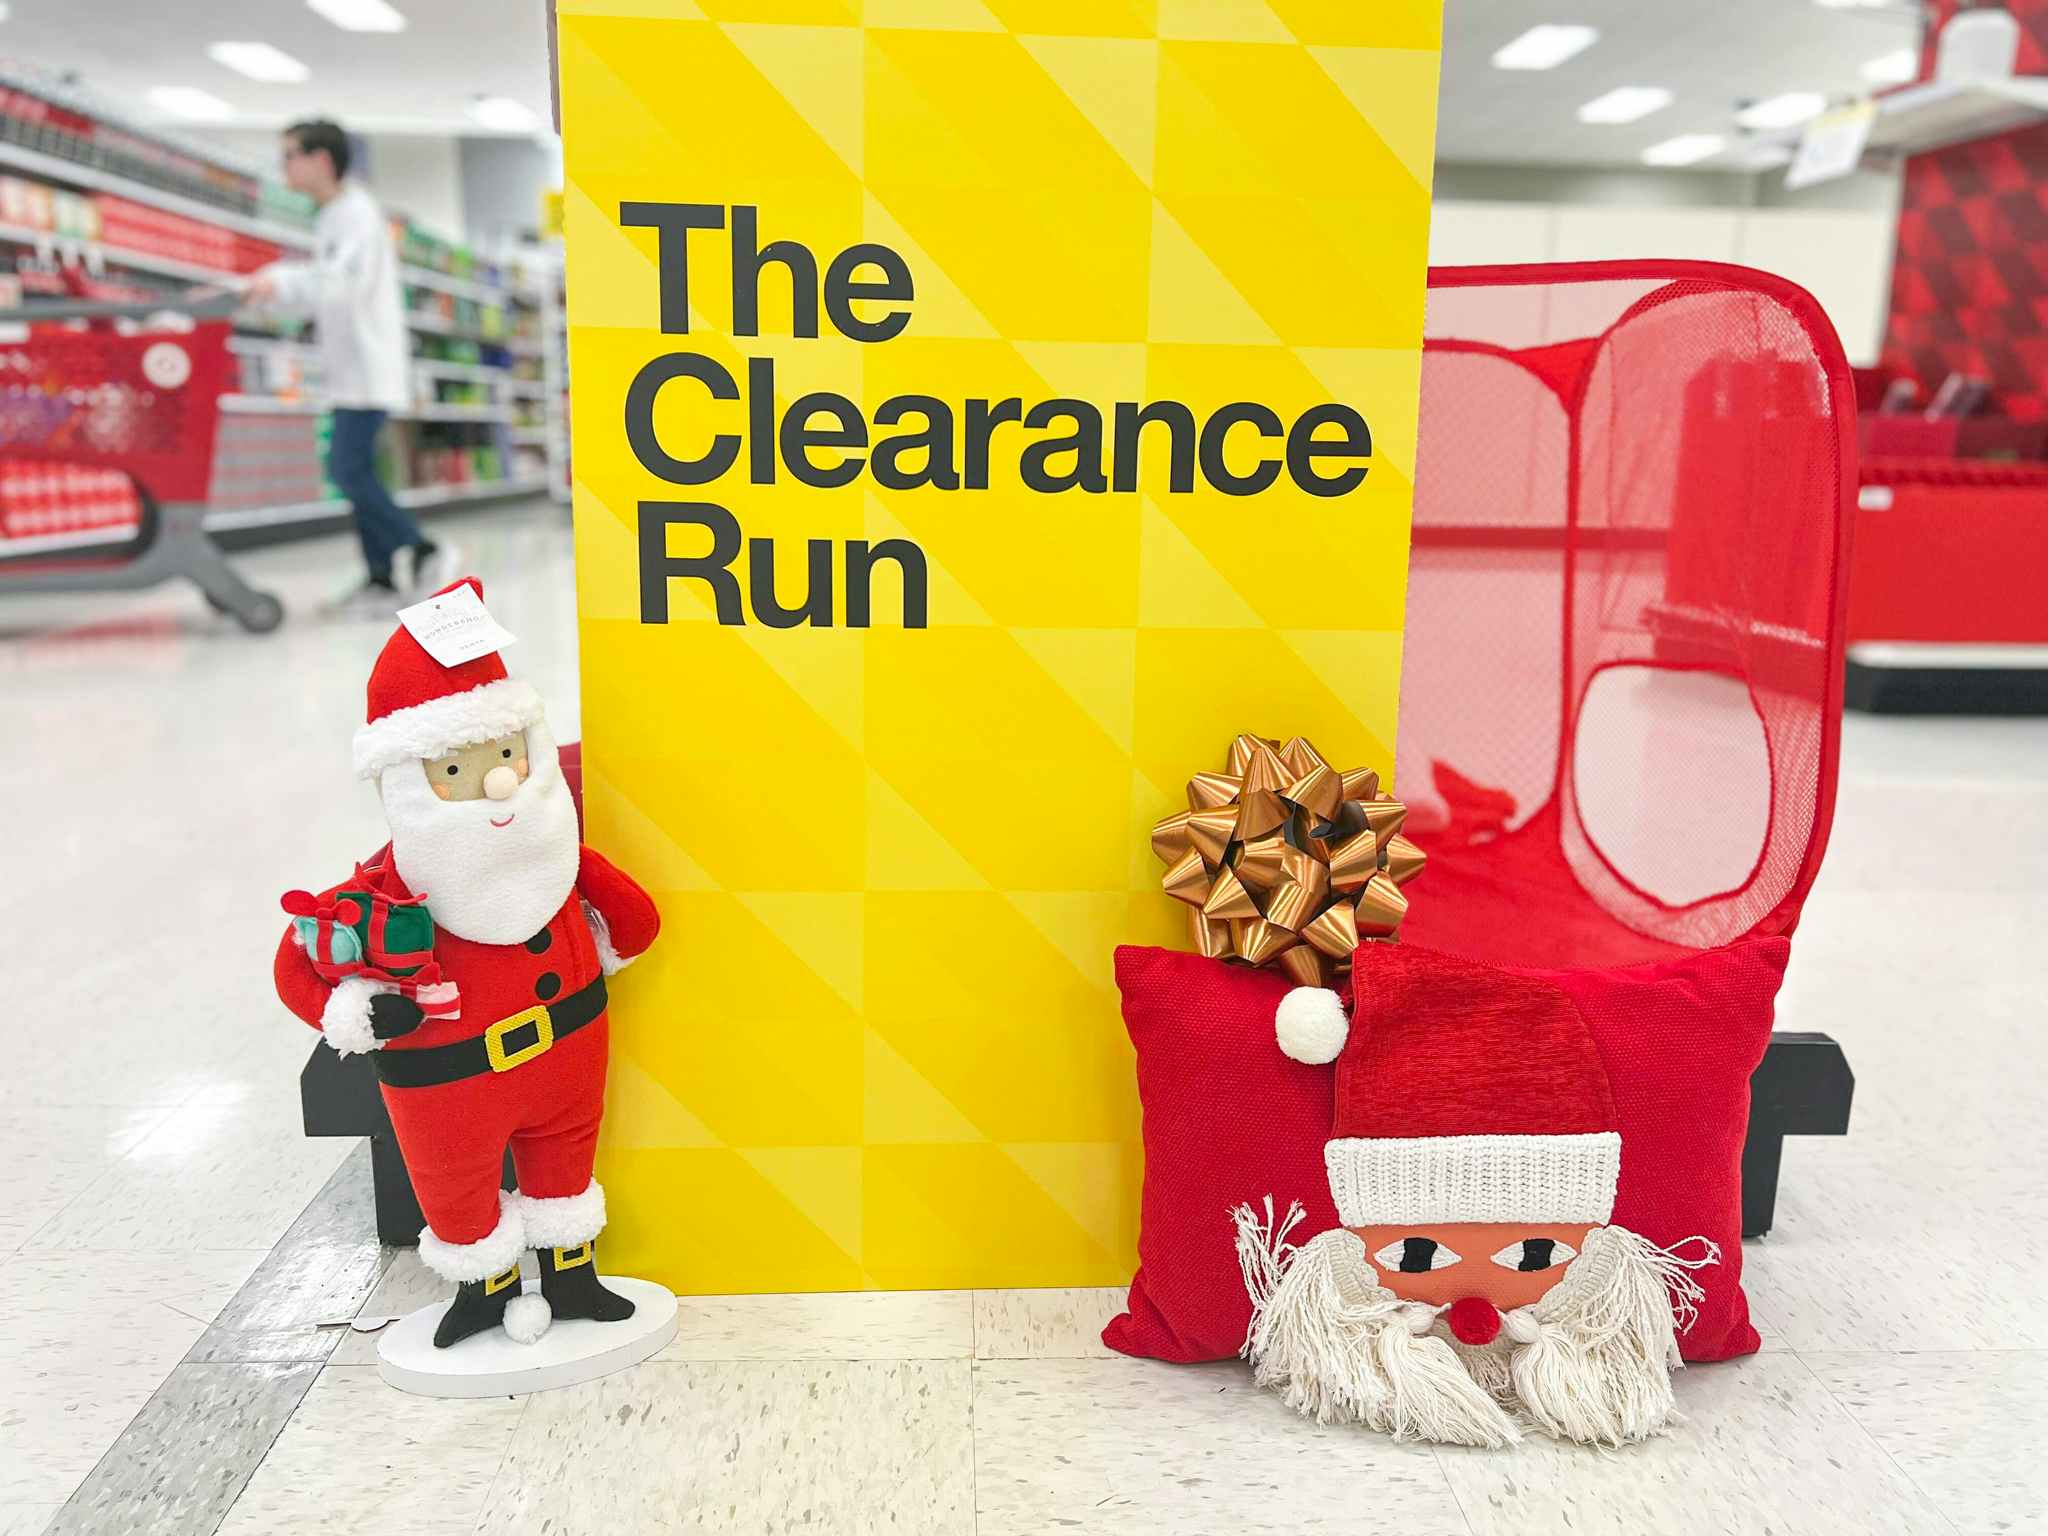 At Home - Christmas clearance starts now! Our stores are UP TO 50